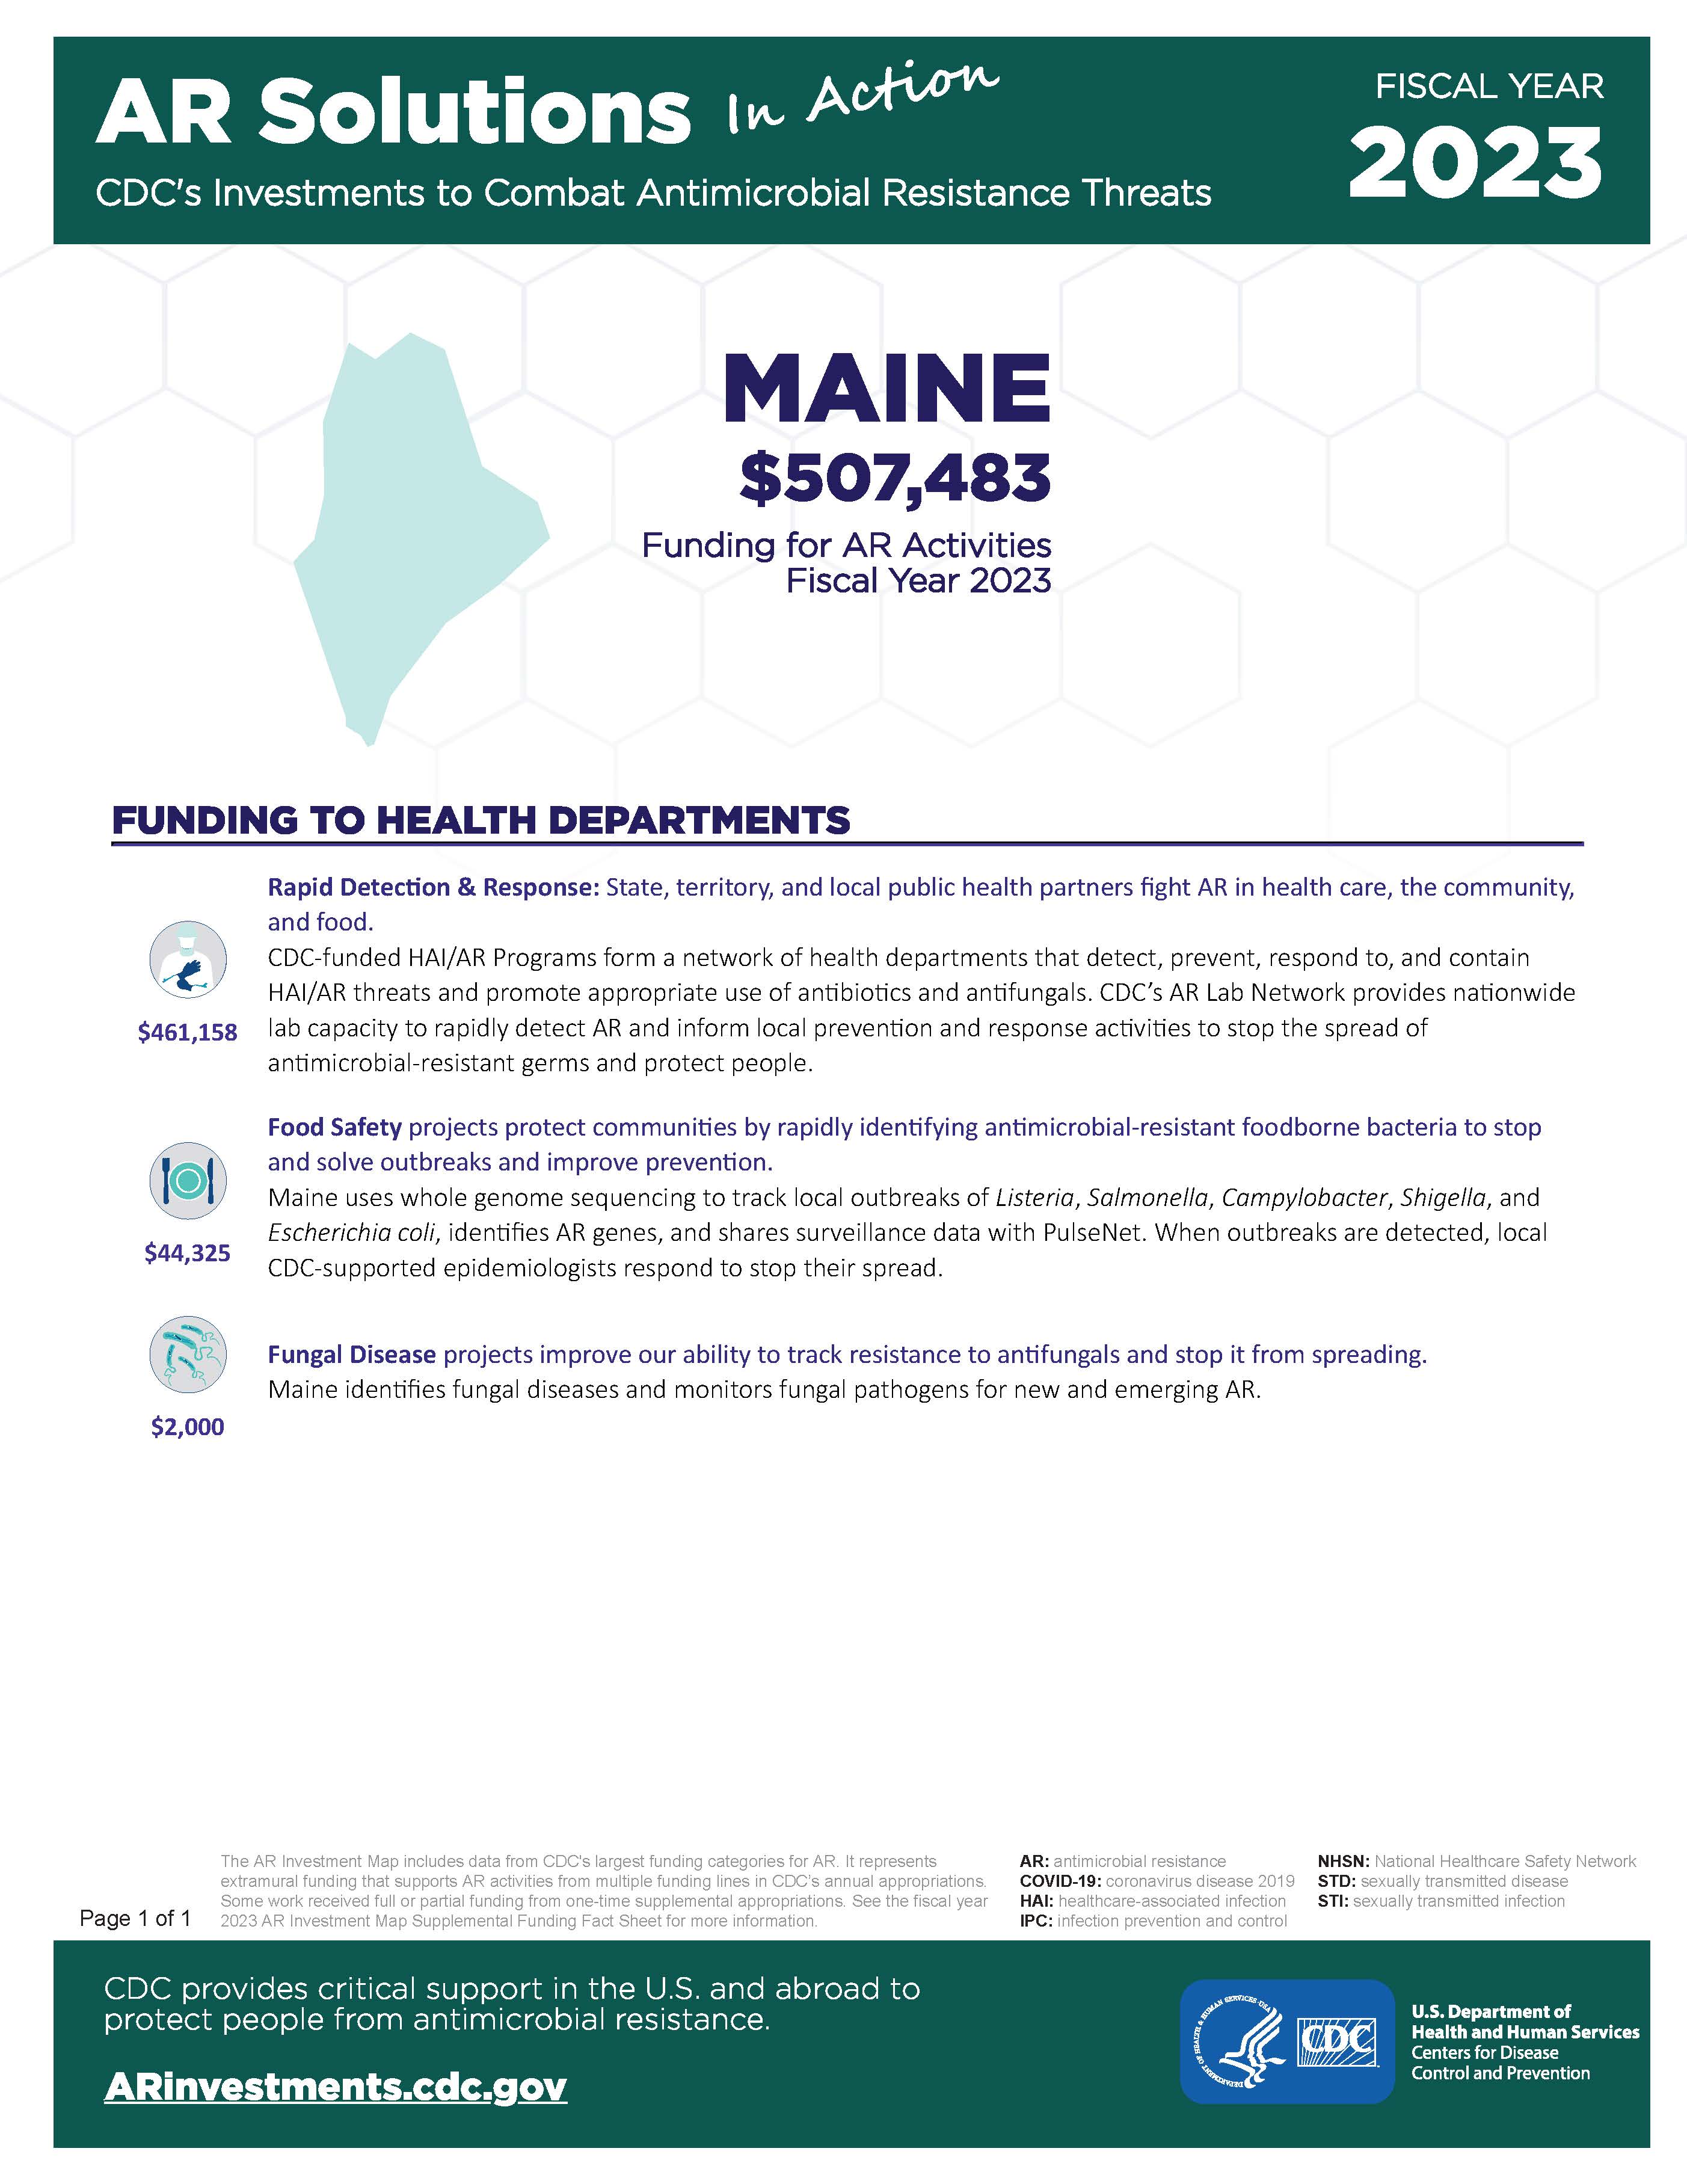 View Factsheet for Maine